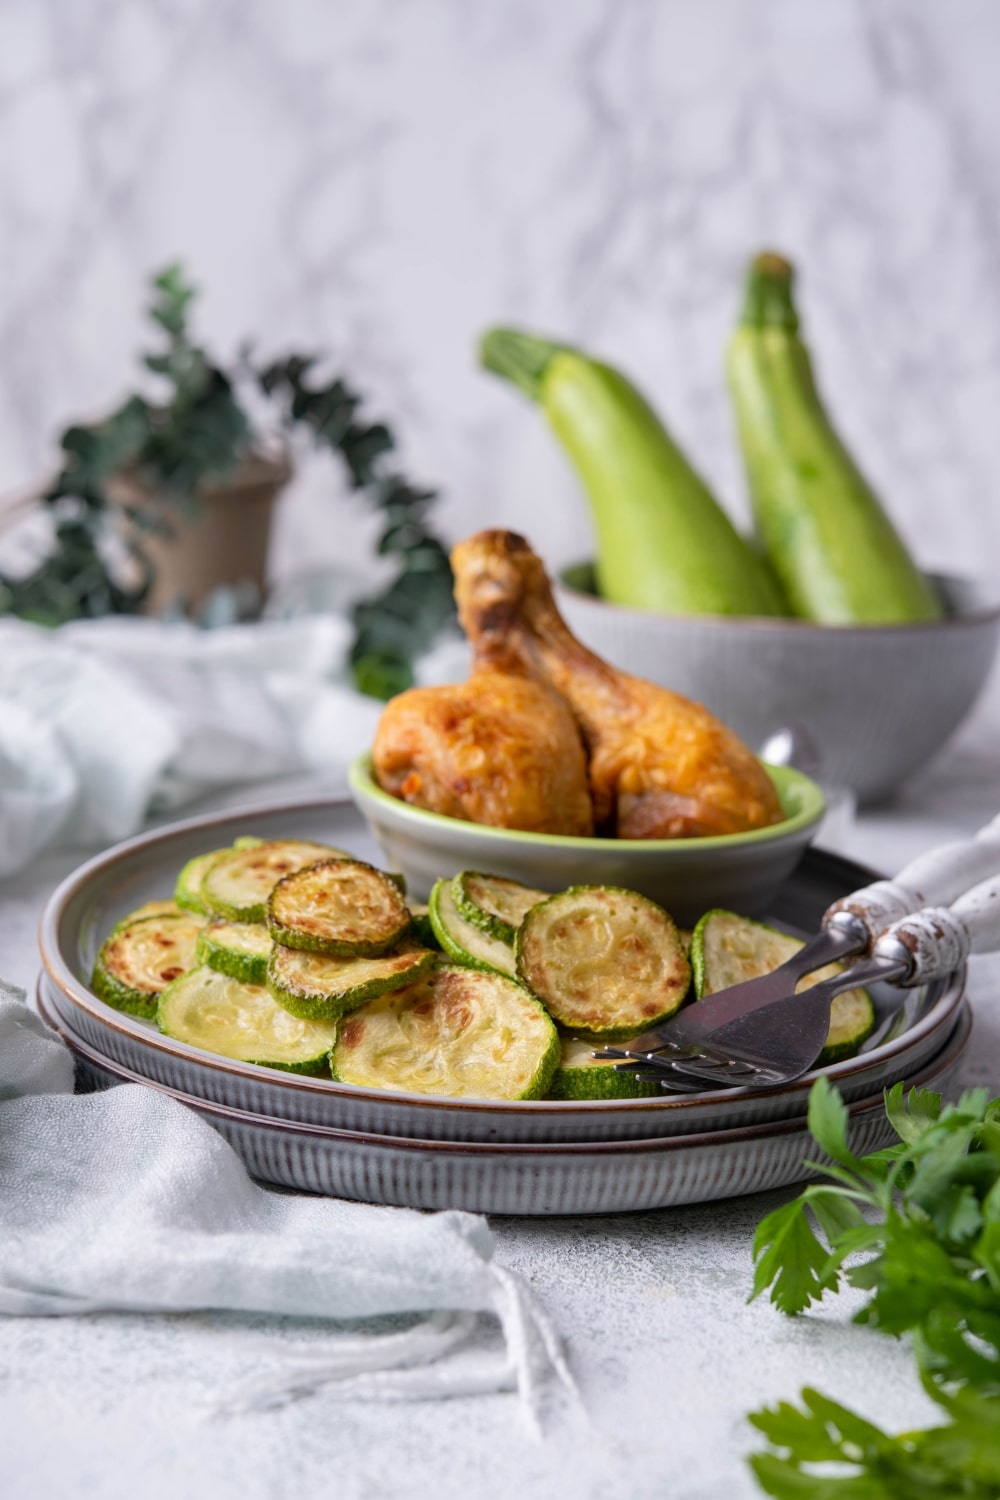 Sauteed zucchini slices on a blue grey plate with a small bowl of two fried chicken drumsticks and two forks. In the back is a bowl of fresh zucchinis.